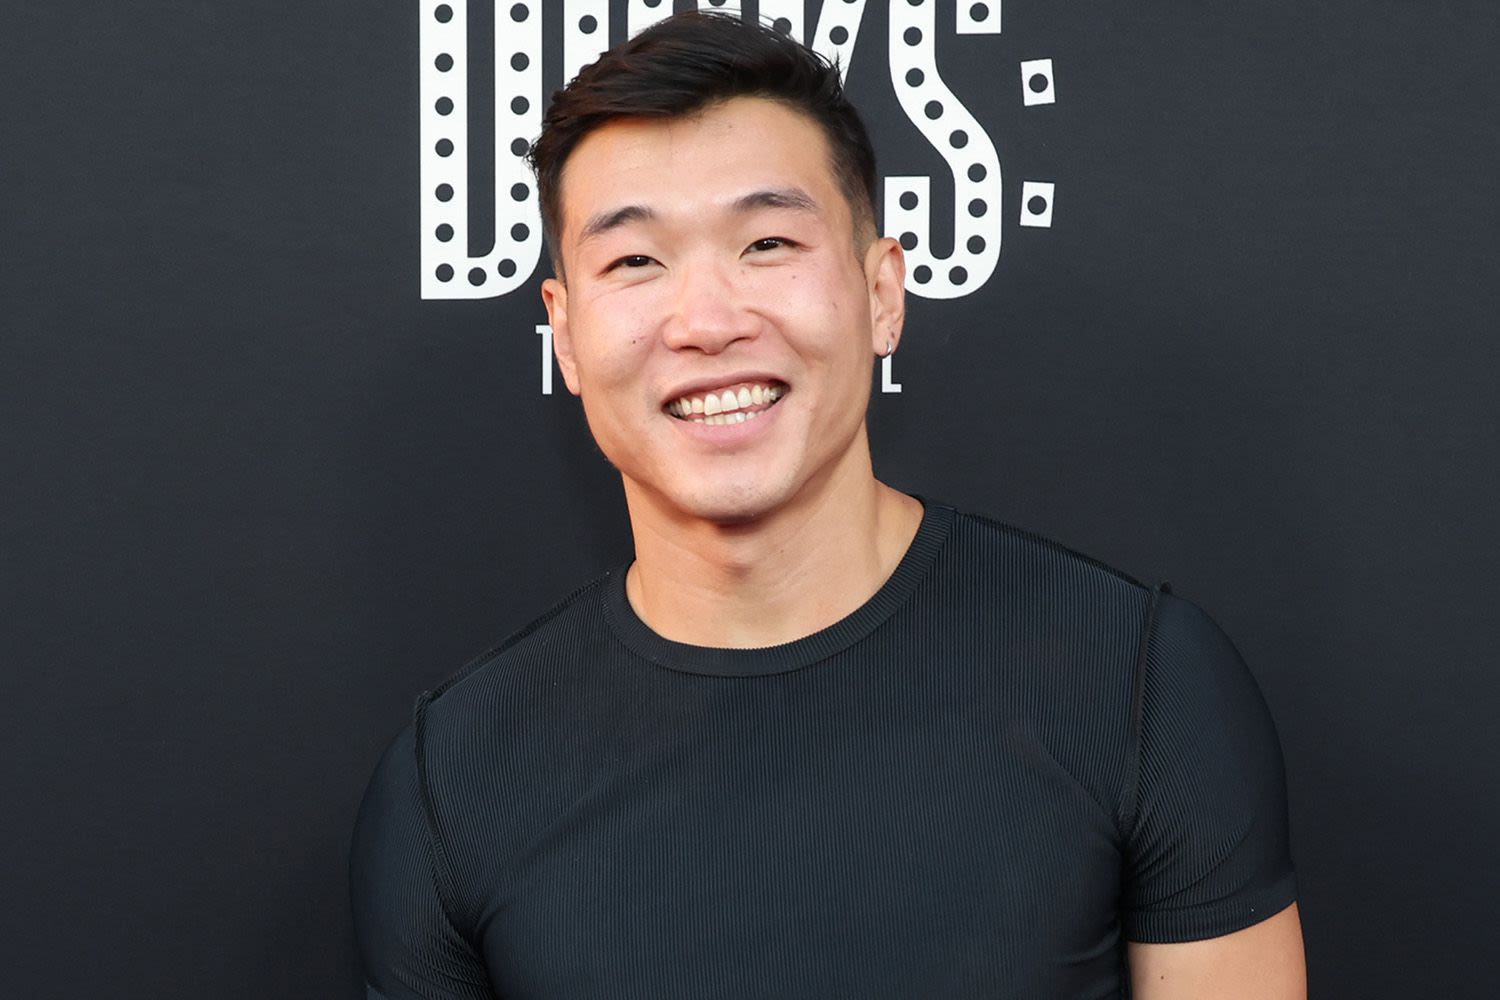 Joel Kim Booster Isn’t Trying to Be a ‘Trailblazer’: ‘I Just Wanted to Make People Laugh’ (Exclusive)